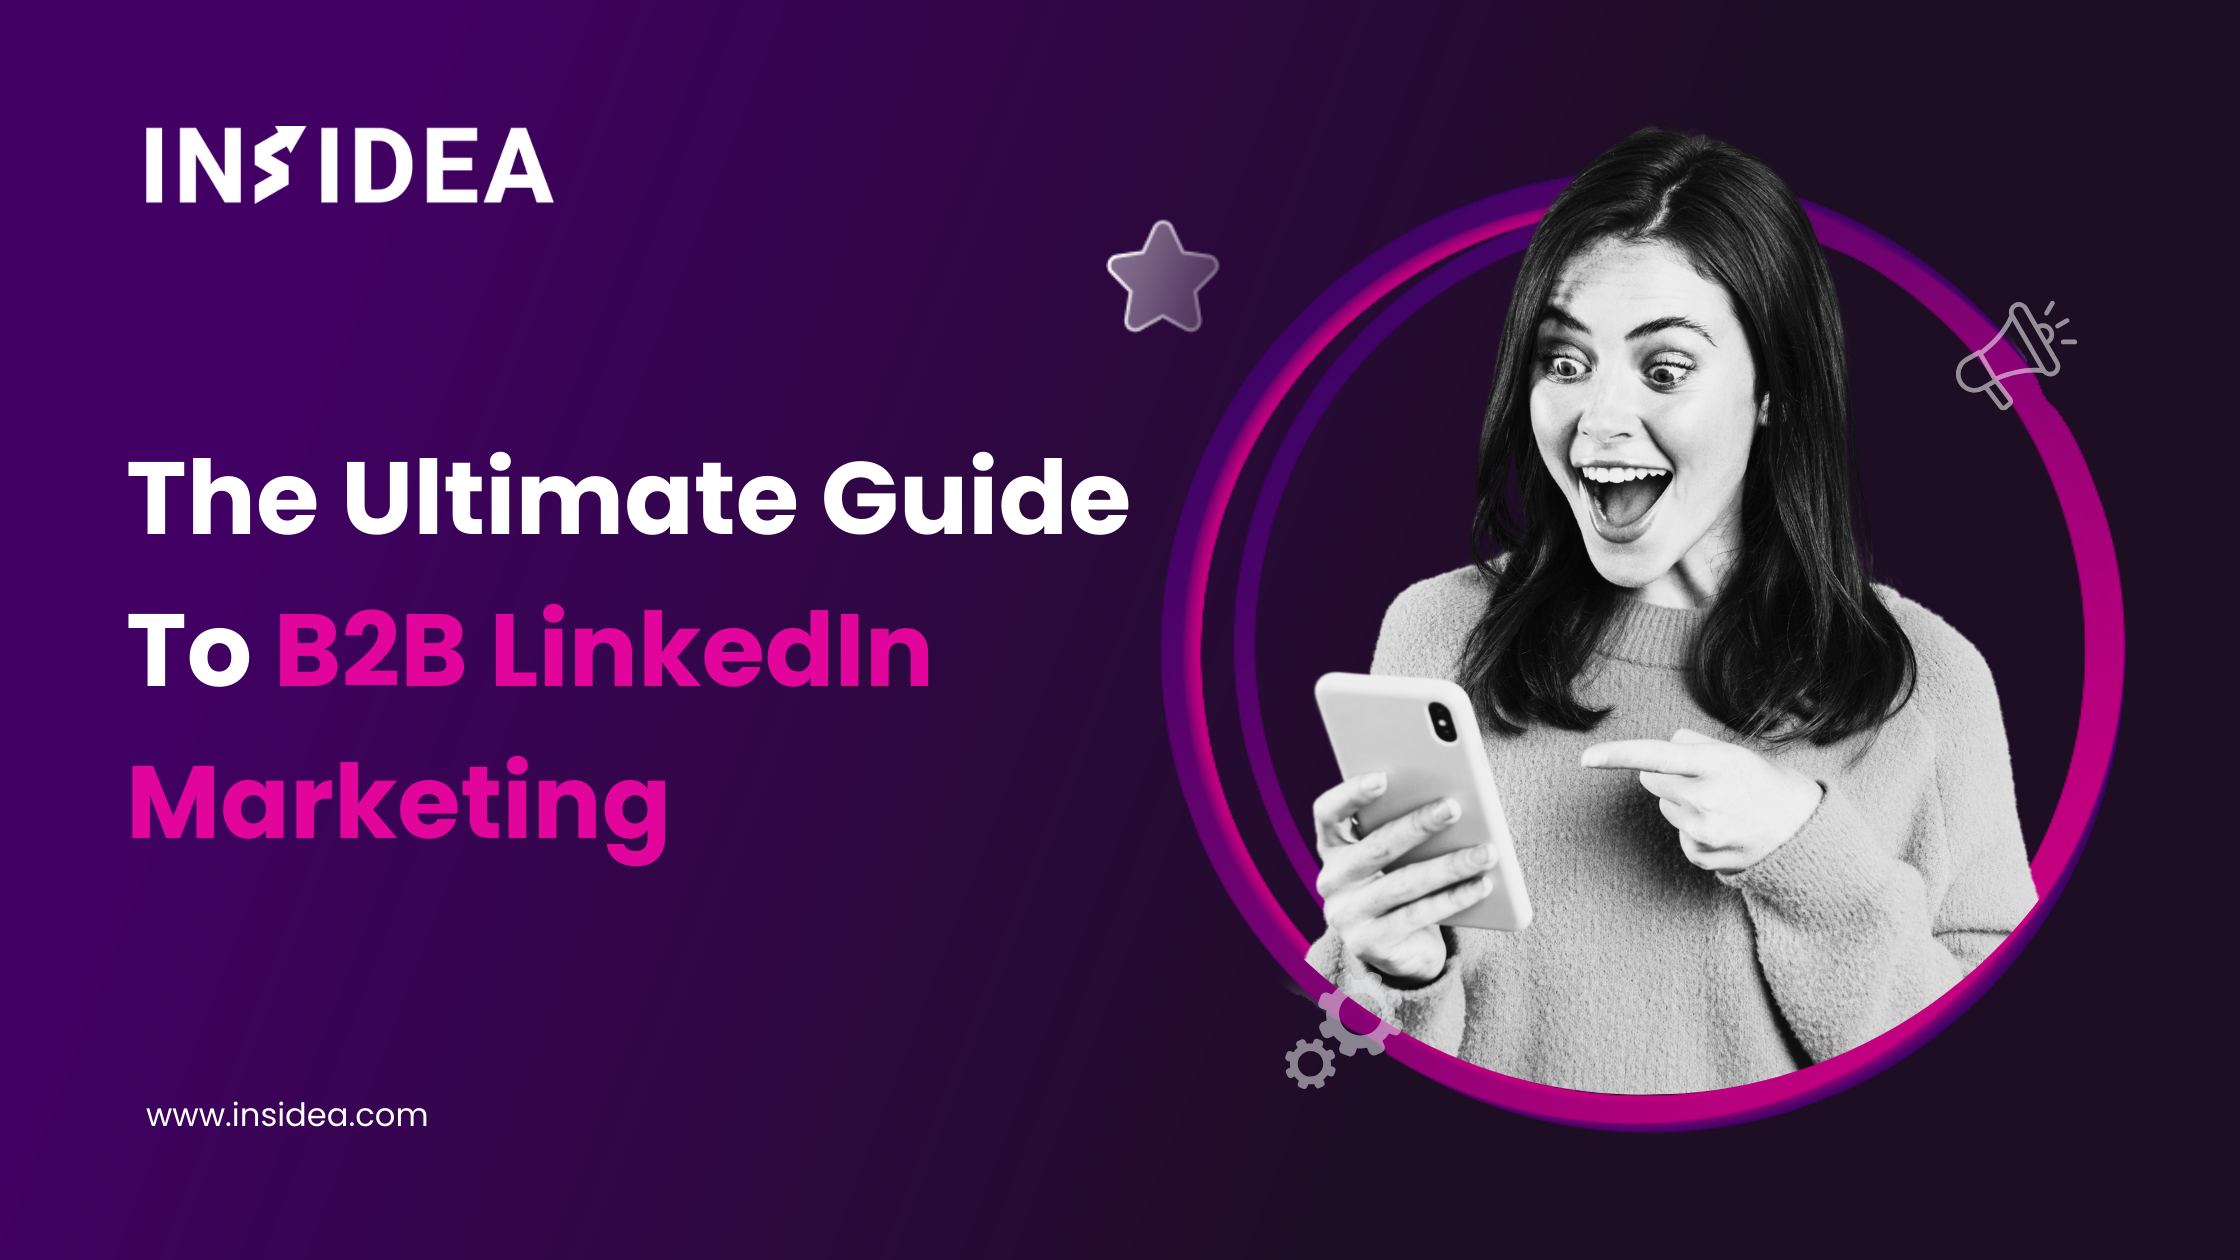 The Ultimate Guide To B2B LinkedIn Marketing